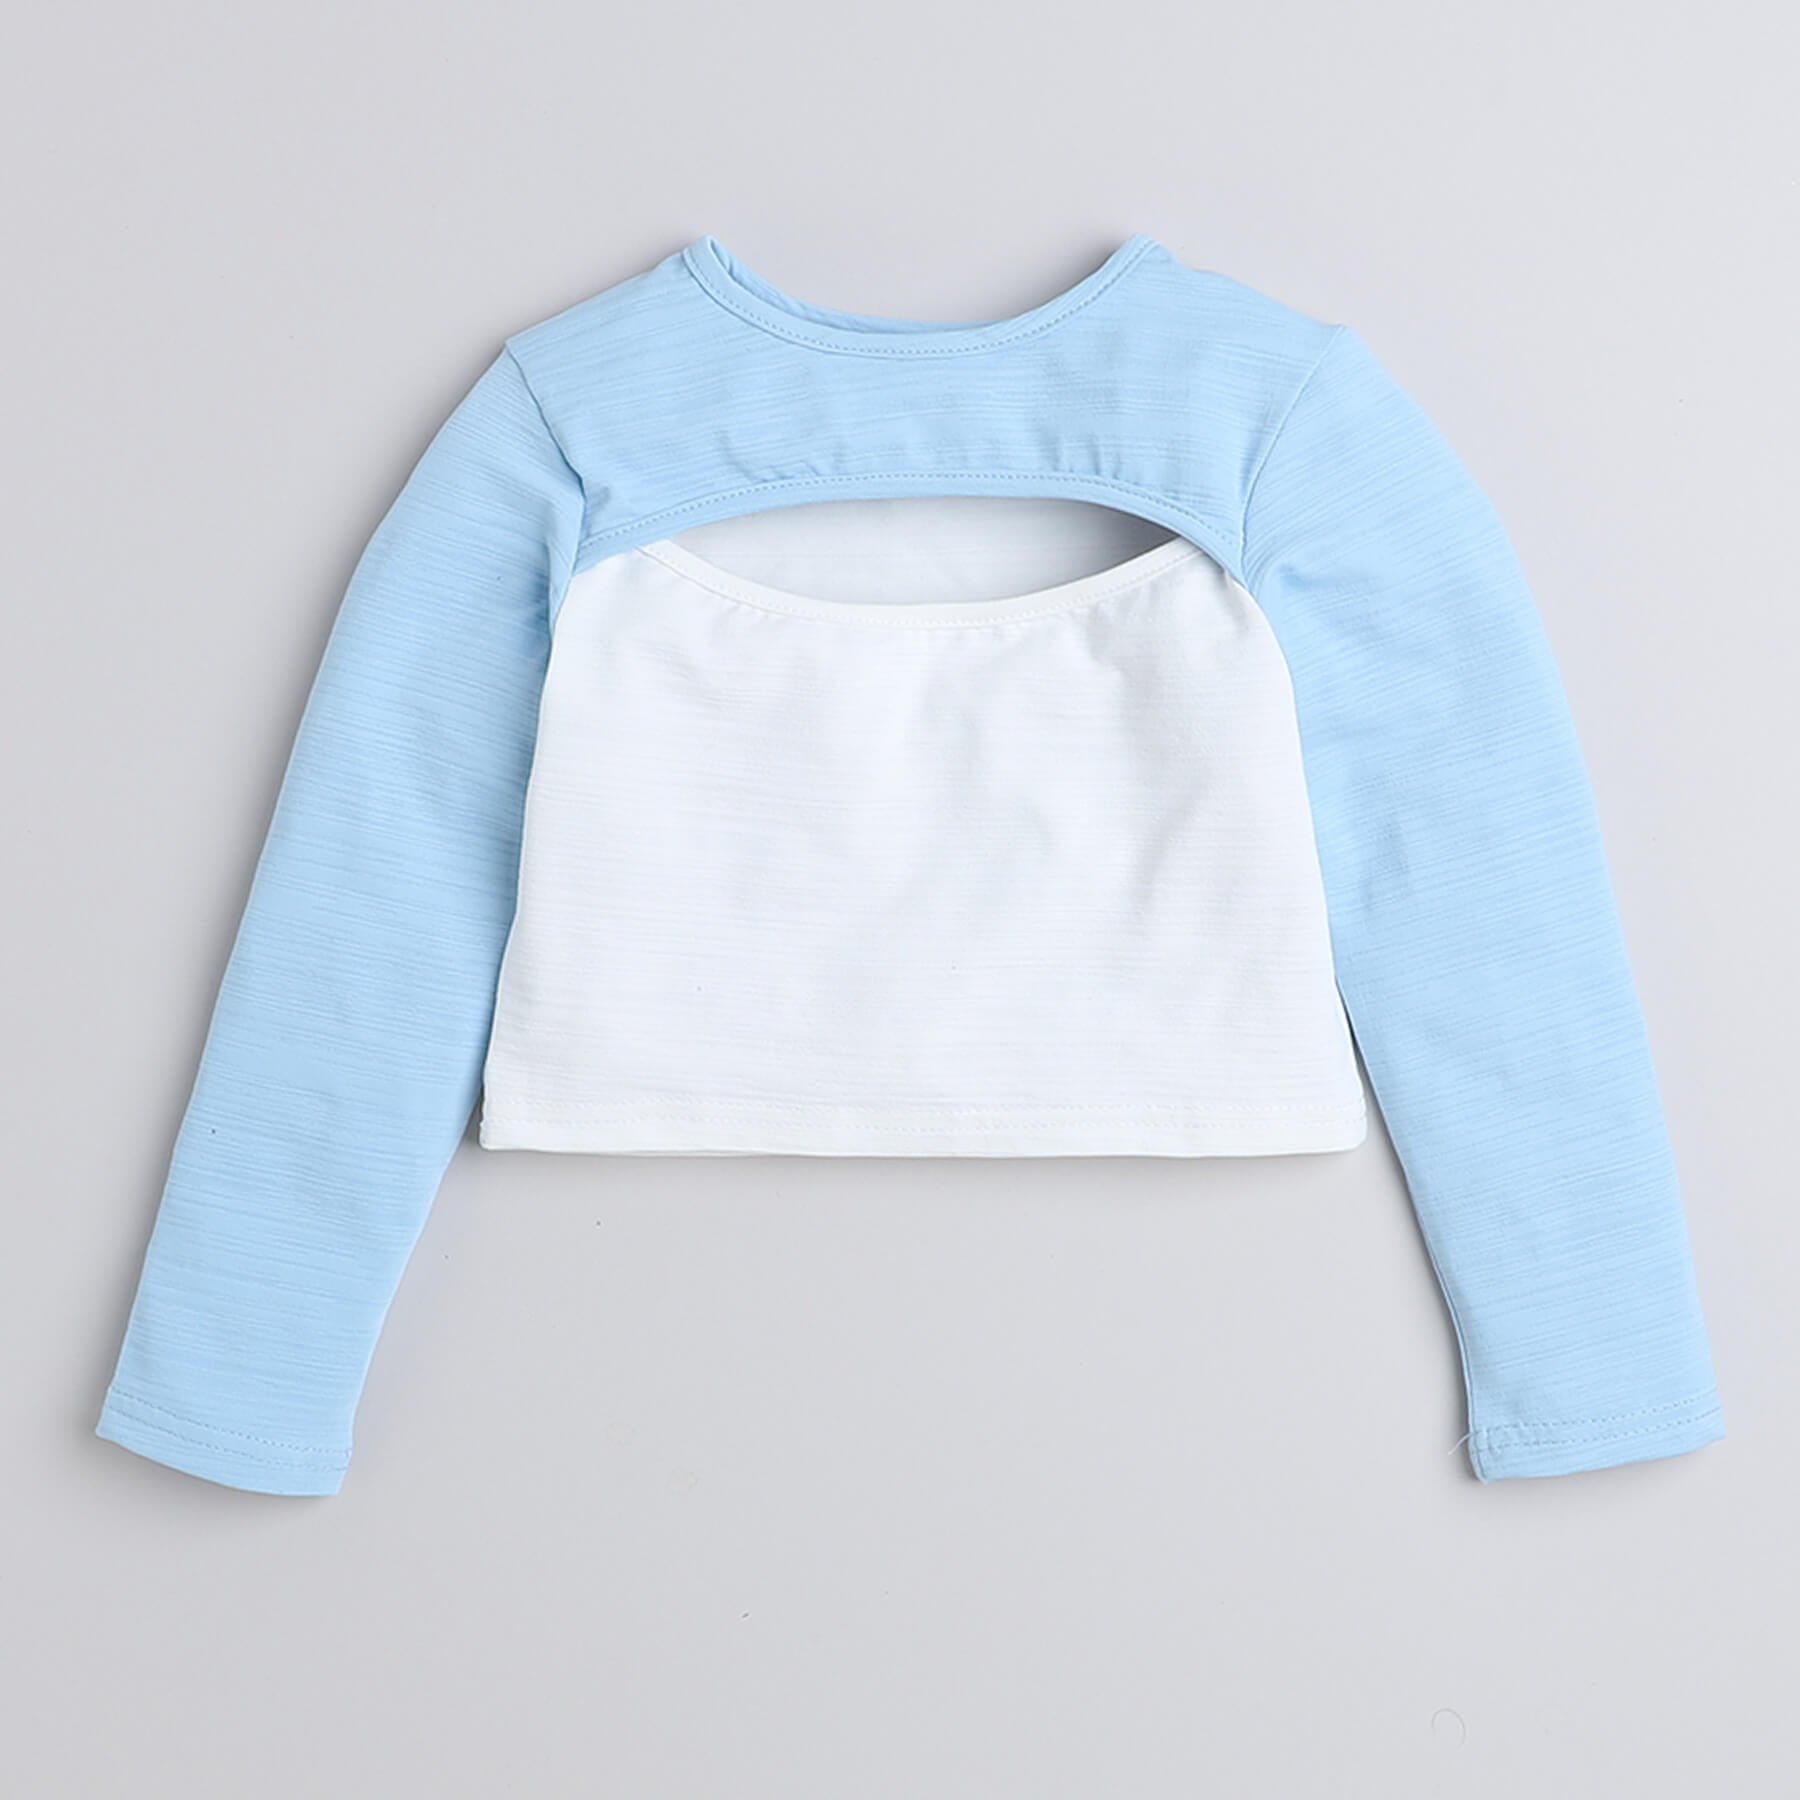 Taffykids color block crop top and cut out detail crop top pack of  2- Blue/white,Yellow